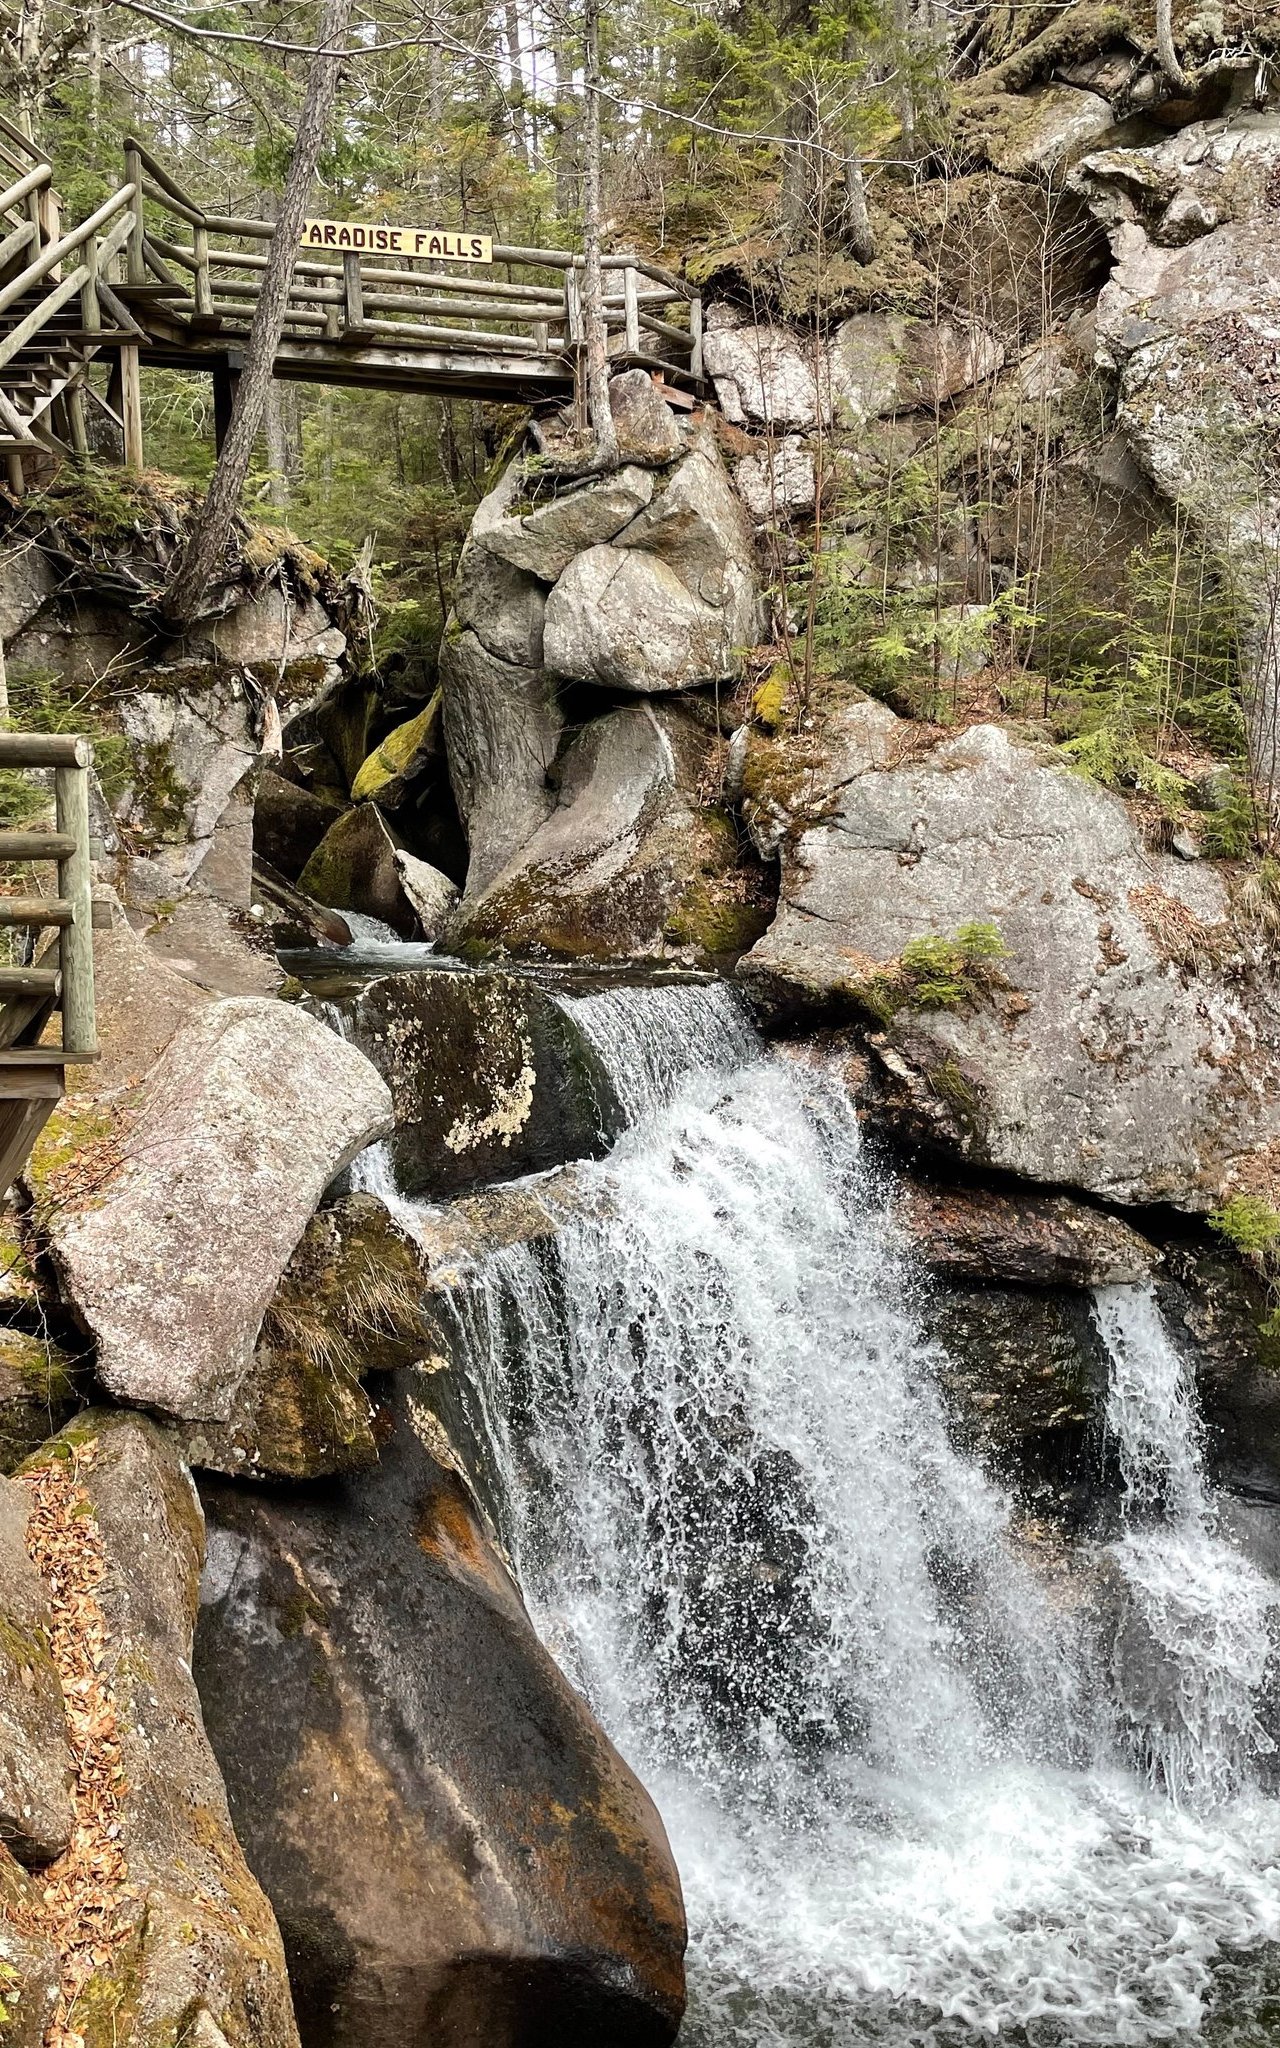 The waterfall at Lost River Gorge at Paradise Falls in New Hampshire